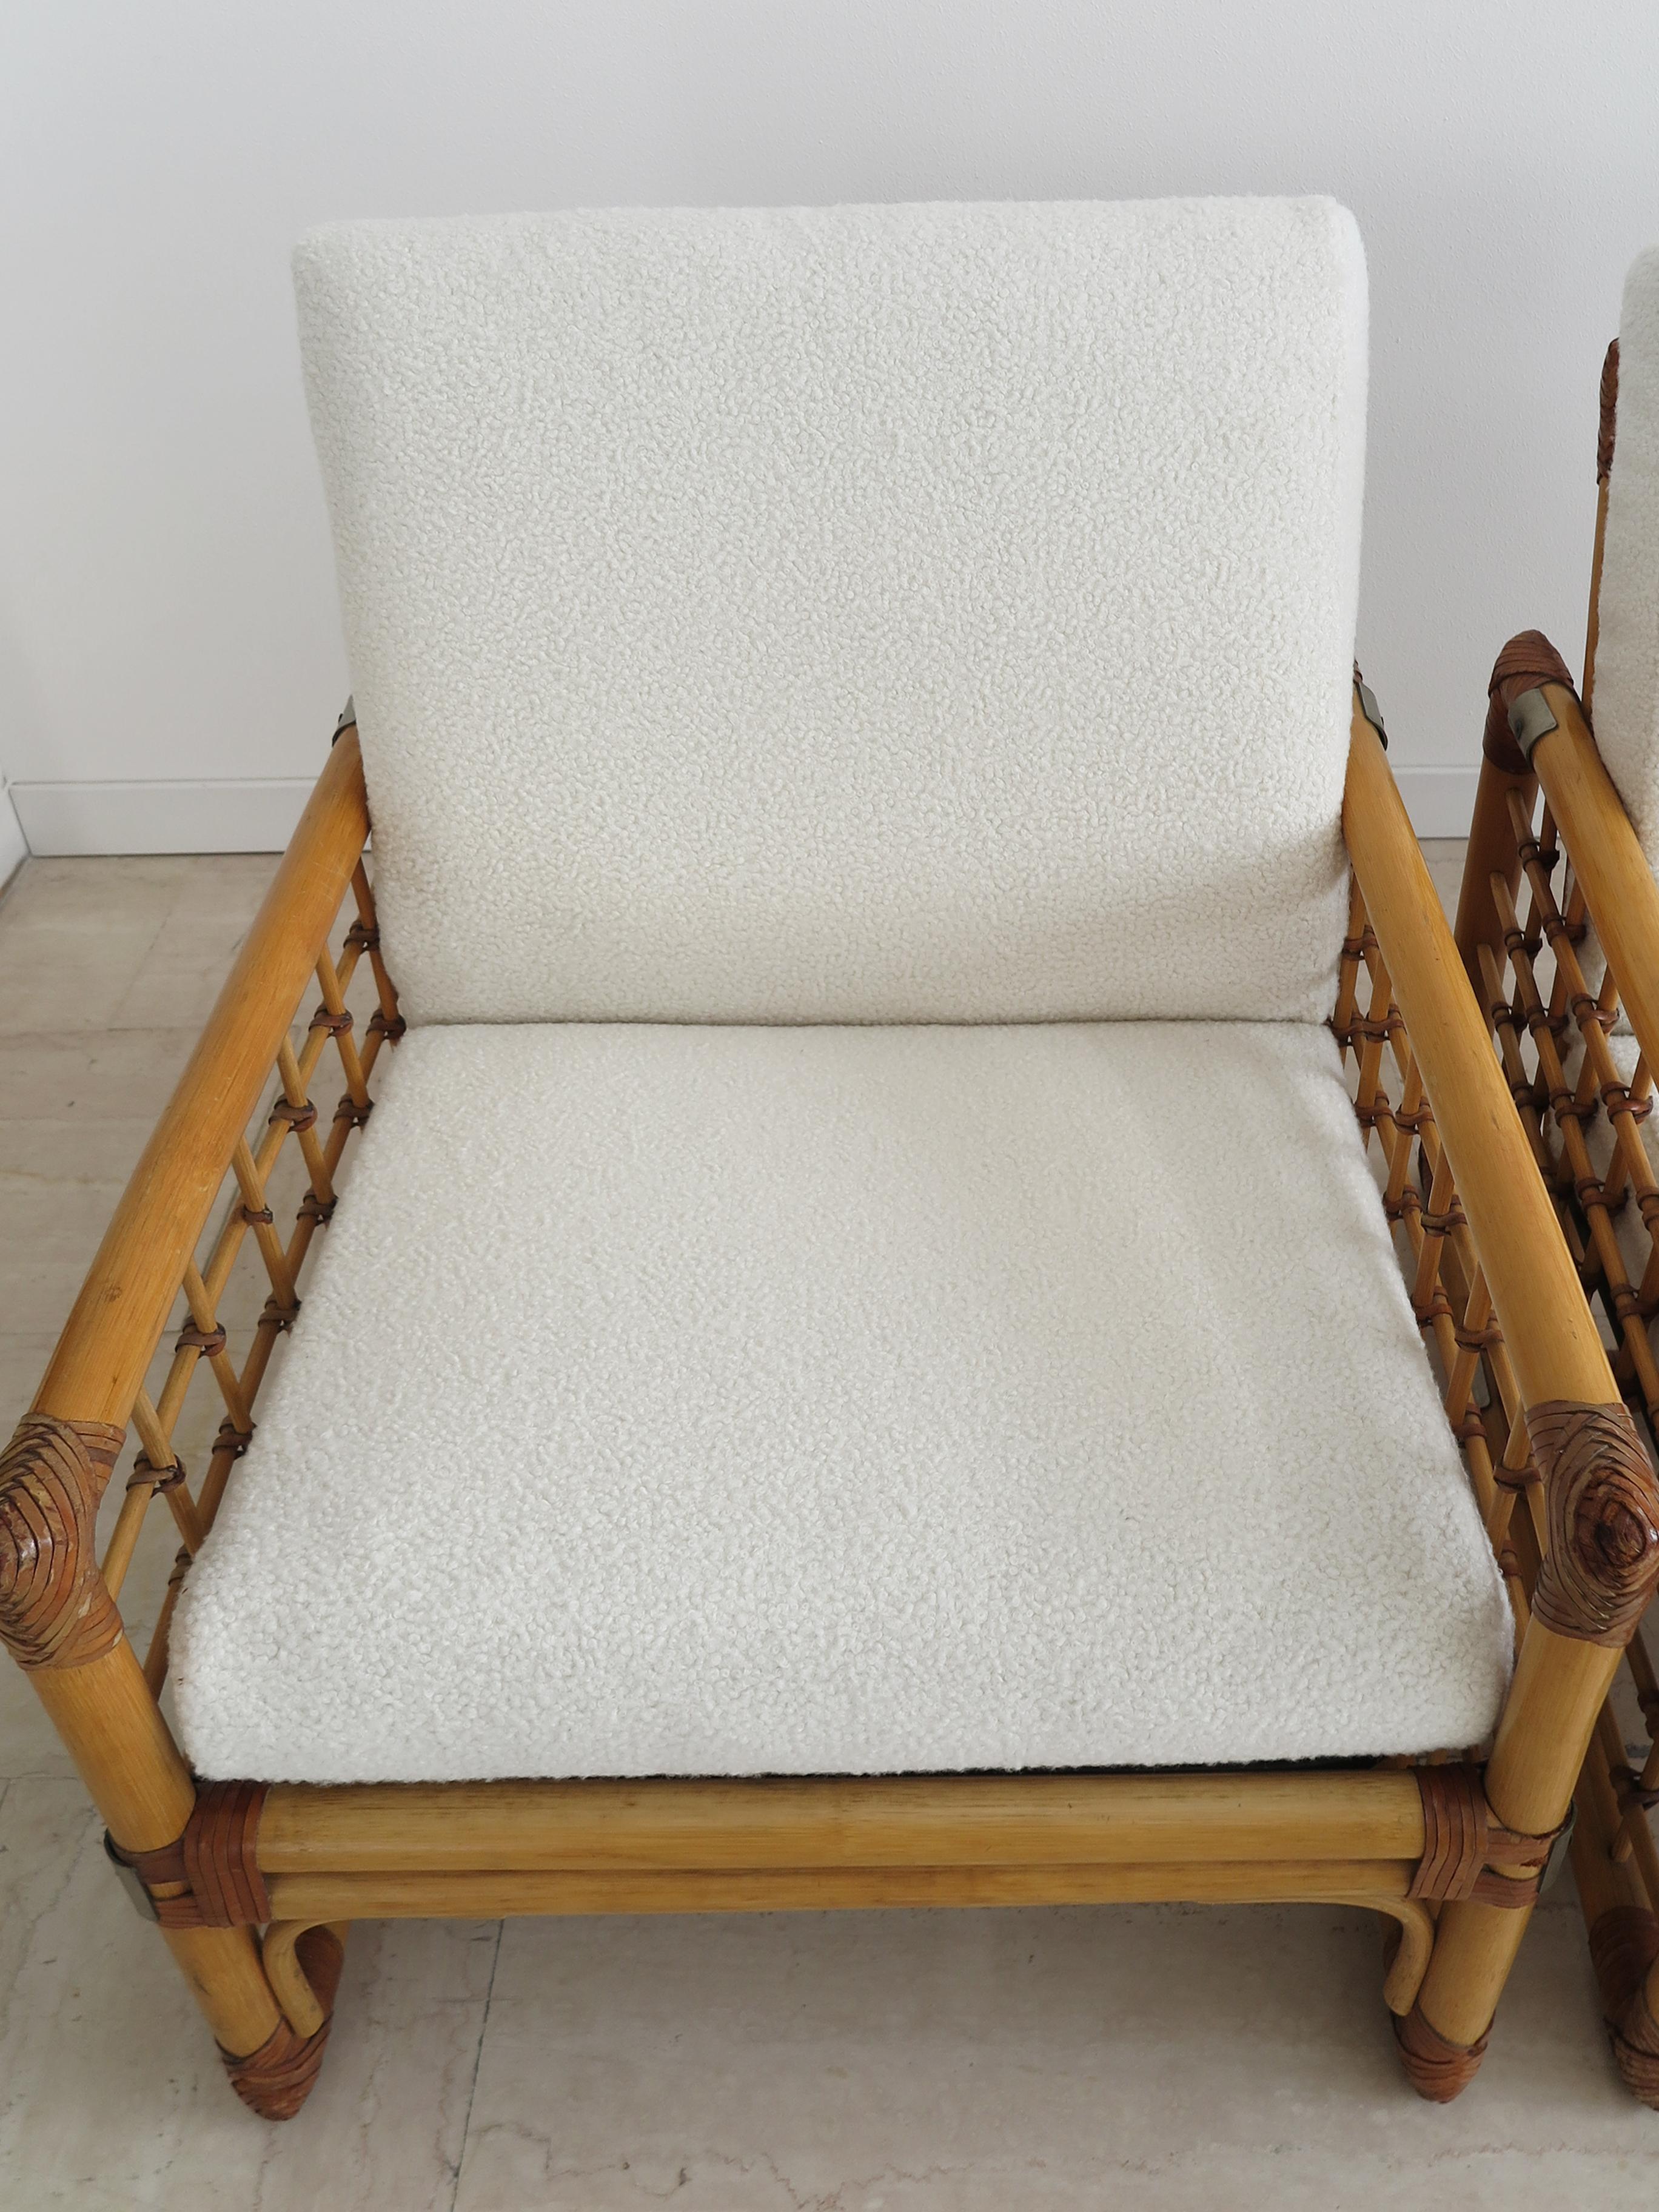 Bamboo, Indian Cane and Frabric Italian Armchairs, 1970s In Good Condition For Sale In Reggio Emilia, IT